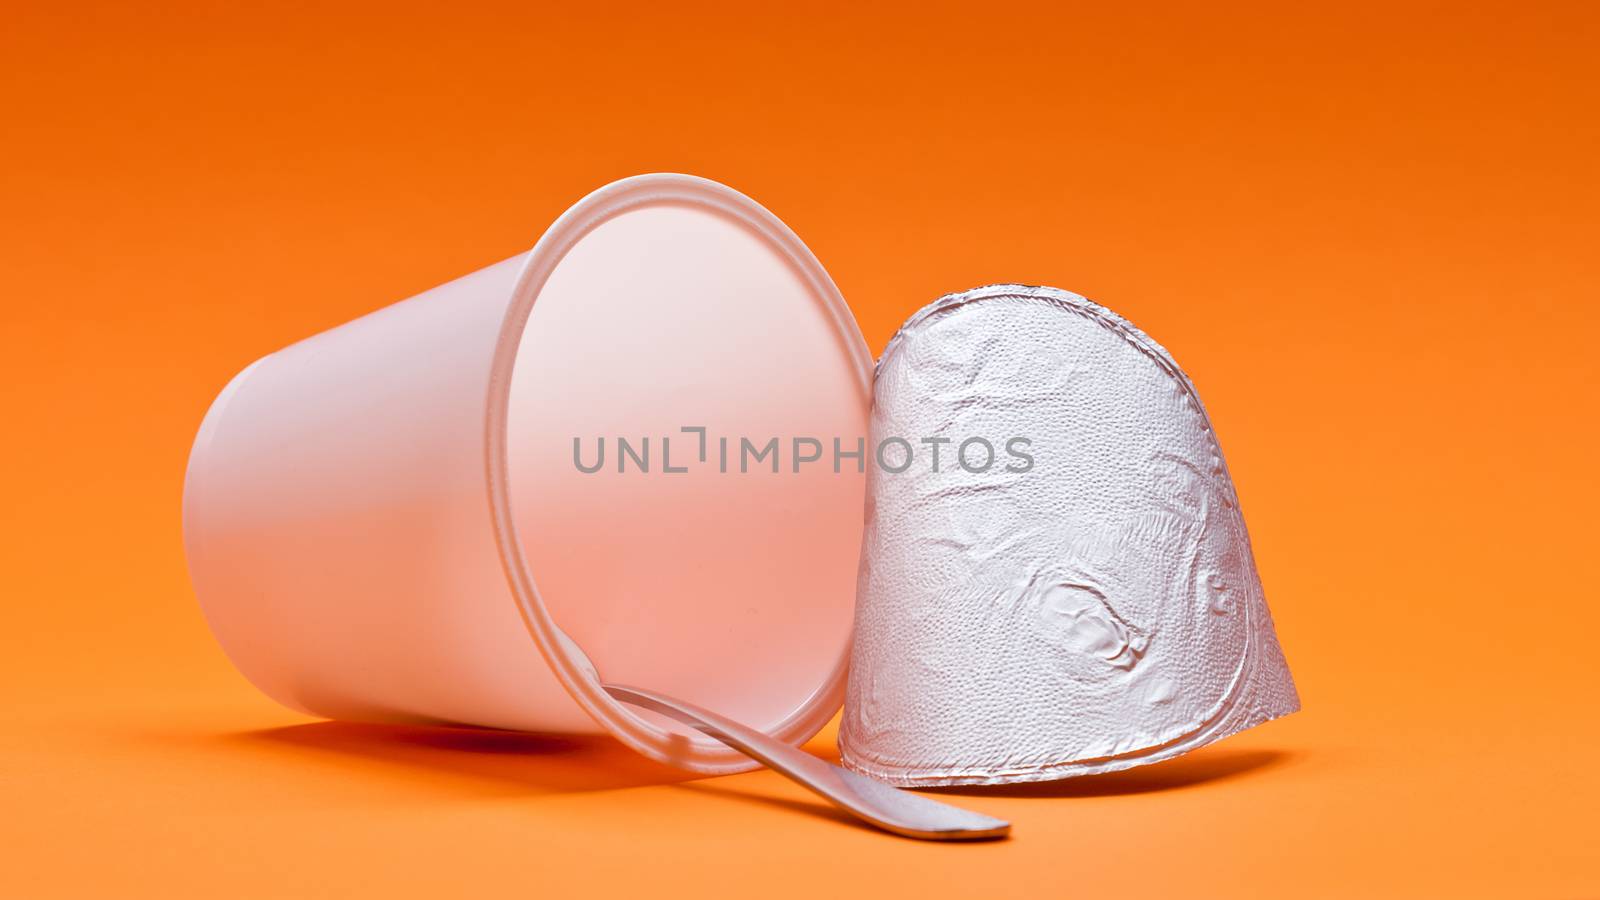 An empty clean yogurt cup with spoon on an orange background